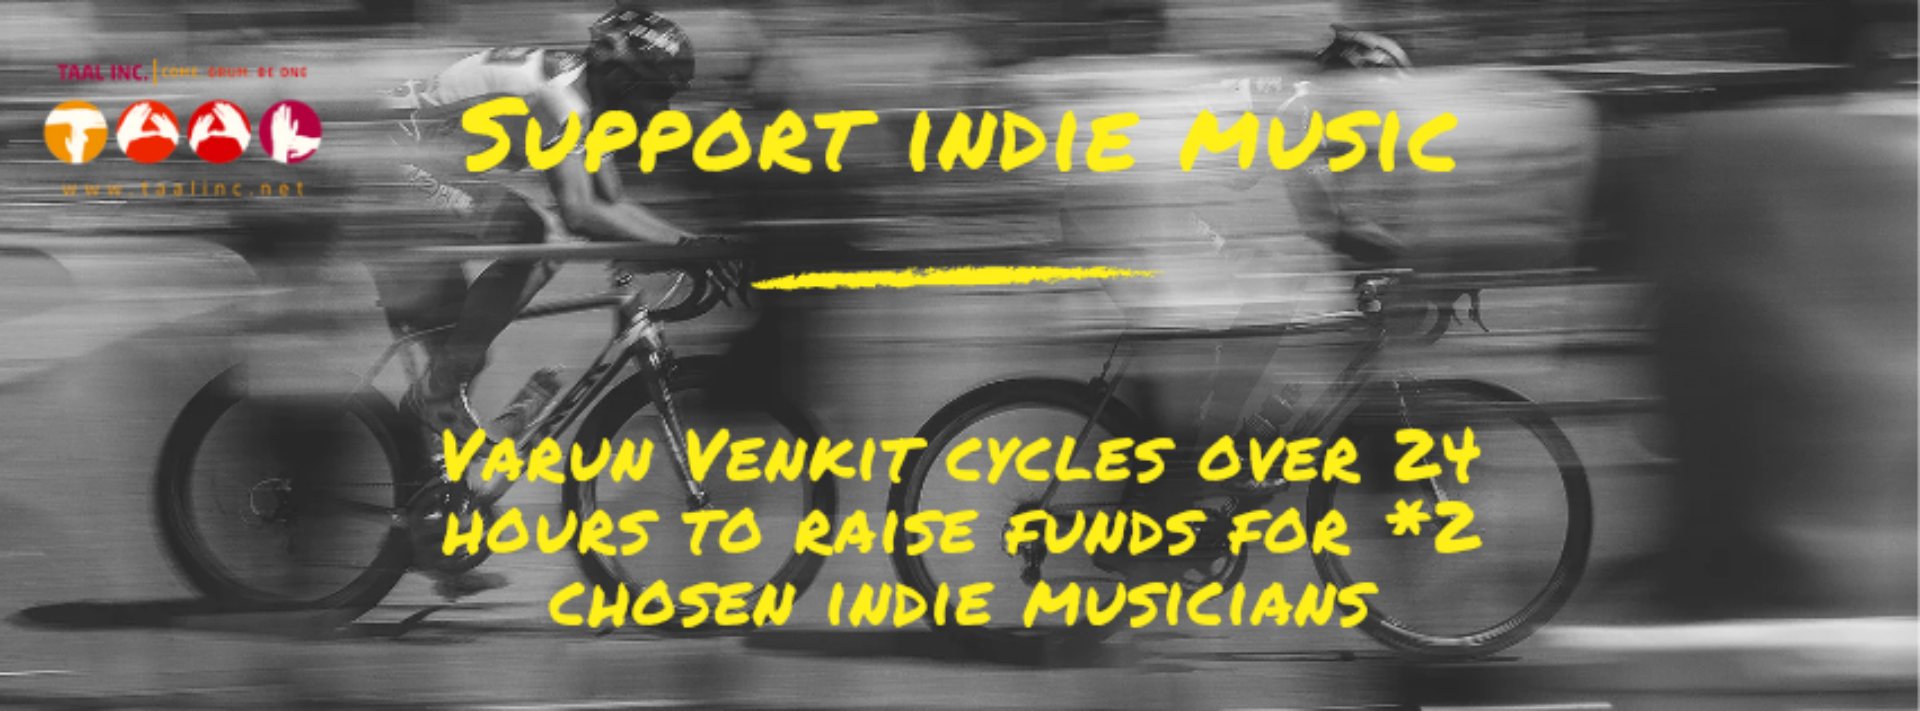 Taal Inc. Support Indie Music Campaign plus Contest